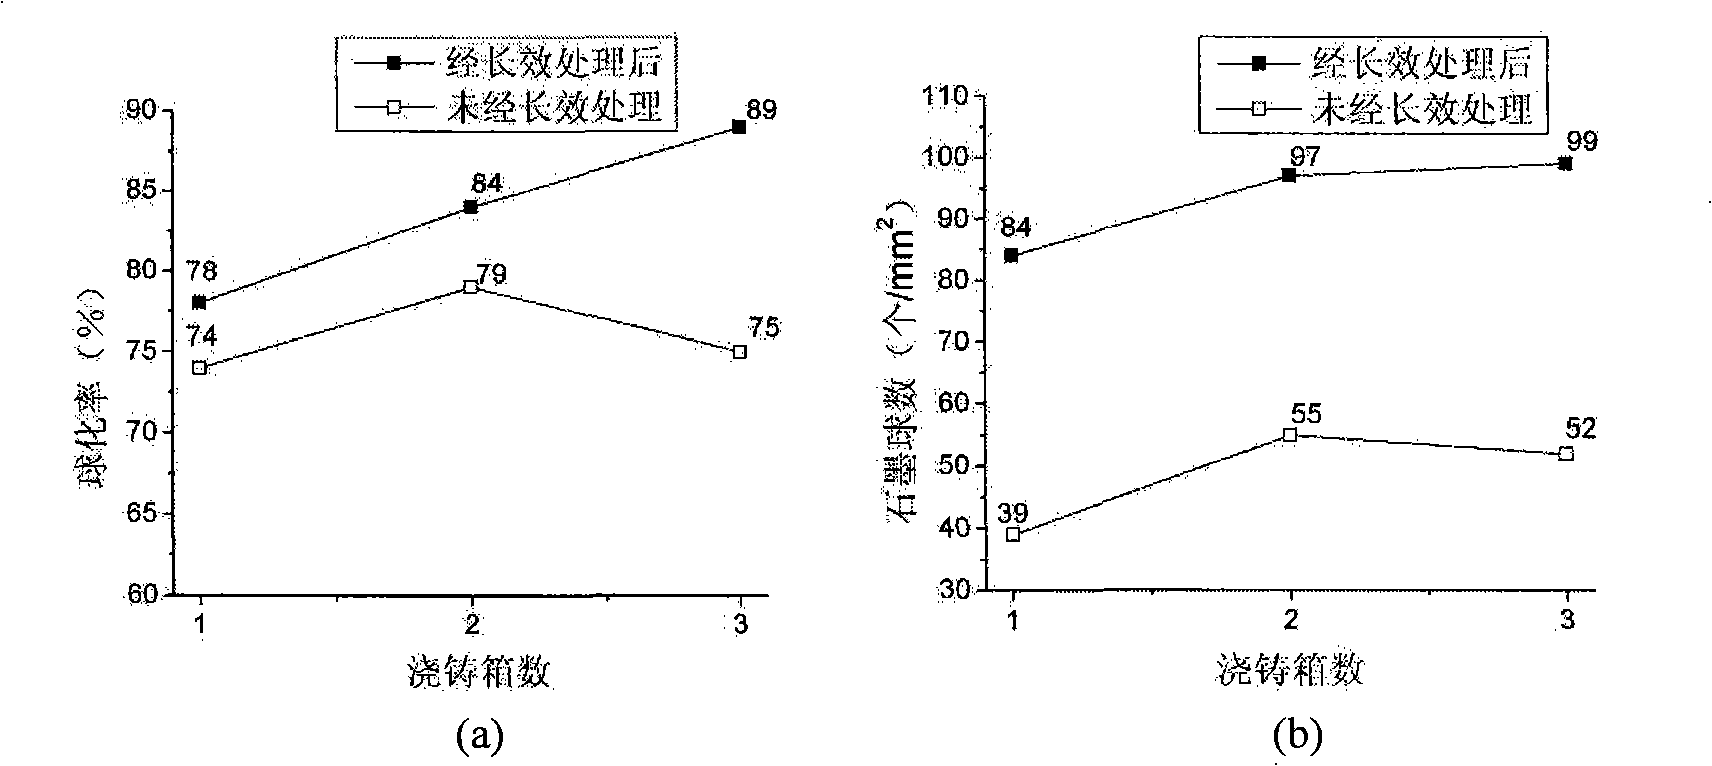 Long-acting synthesizing process of heavy sectioned ductile iron